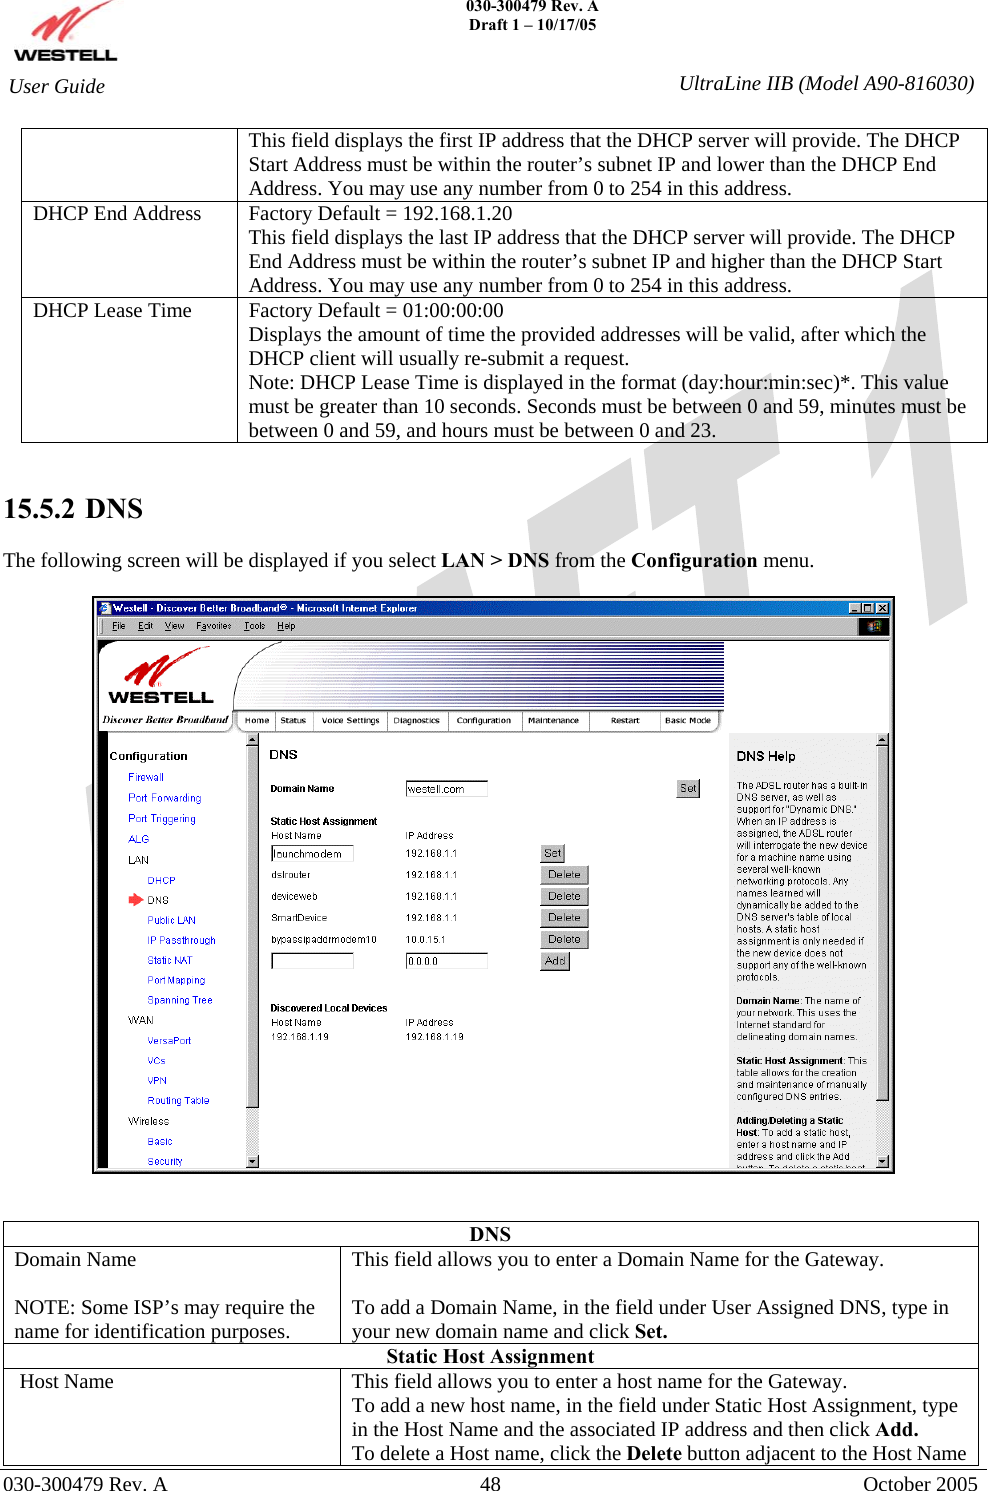    030-300479 Rev. A Draft 1 – 10/17/05   030-300479 Rev. A  48  October 2005  User Guide  UltraLine IIB (Model A90-816030)This field displays the first IP address that the DHCP server will provide. The DHCP Start Address must be within the router’s subnet IP and lower than the DHCP End Address. You may use any number from 0 to 254 in this address. DHCP End Address  Factory Default = 192.168.1.20 This field displays the last IP address that the DHCP server will provide. The DHCP End Address must be within the router’s subnet IP and higher than the DHCP Start Address. You may use any number from 0 to 254 in this address. DHCP Lease Time  Factory Default = 01:00:00:00  Displays the amount of time the provided addresses will be valid, after which the DHCP client will usually re-submit a request. Note: DHCP Lease Time is displayed in the format (day:hour:min:sec)*. This value must be greater than 10 seconds. Seconds must be between 0 and 59, minutes must be between 0 and 59, and hours must be between 0 and 23.     15.5.2   DNS  The following screen will be displayed if you select LAN &gt; DNS from the Configuration menu.      DNS Domain Name  NOTE: Some ISP’s may require the name for identification purposes. This field allows you to enter a Domain Name for the Gateway.  To add a Domain Name, in the field under User Assigned DNS, type in your new domain name and click Set. Static Host Assignment  Host Name  This field allows you to enter a host name for the Gateway. To add a new host name, in the field under Static Host Assignment, type in the Host Name and the associated IP address and then click Add. To delete a Host name, click the Delete button adjacent to the Host Name 